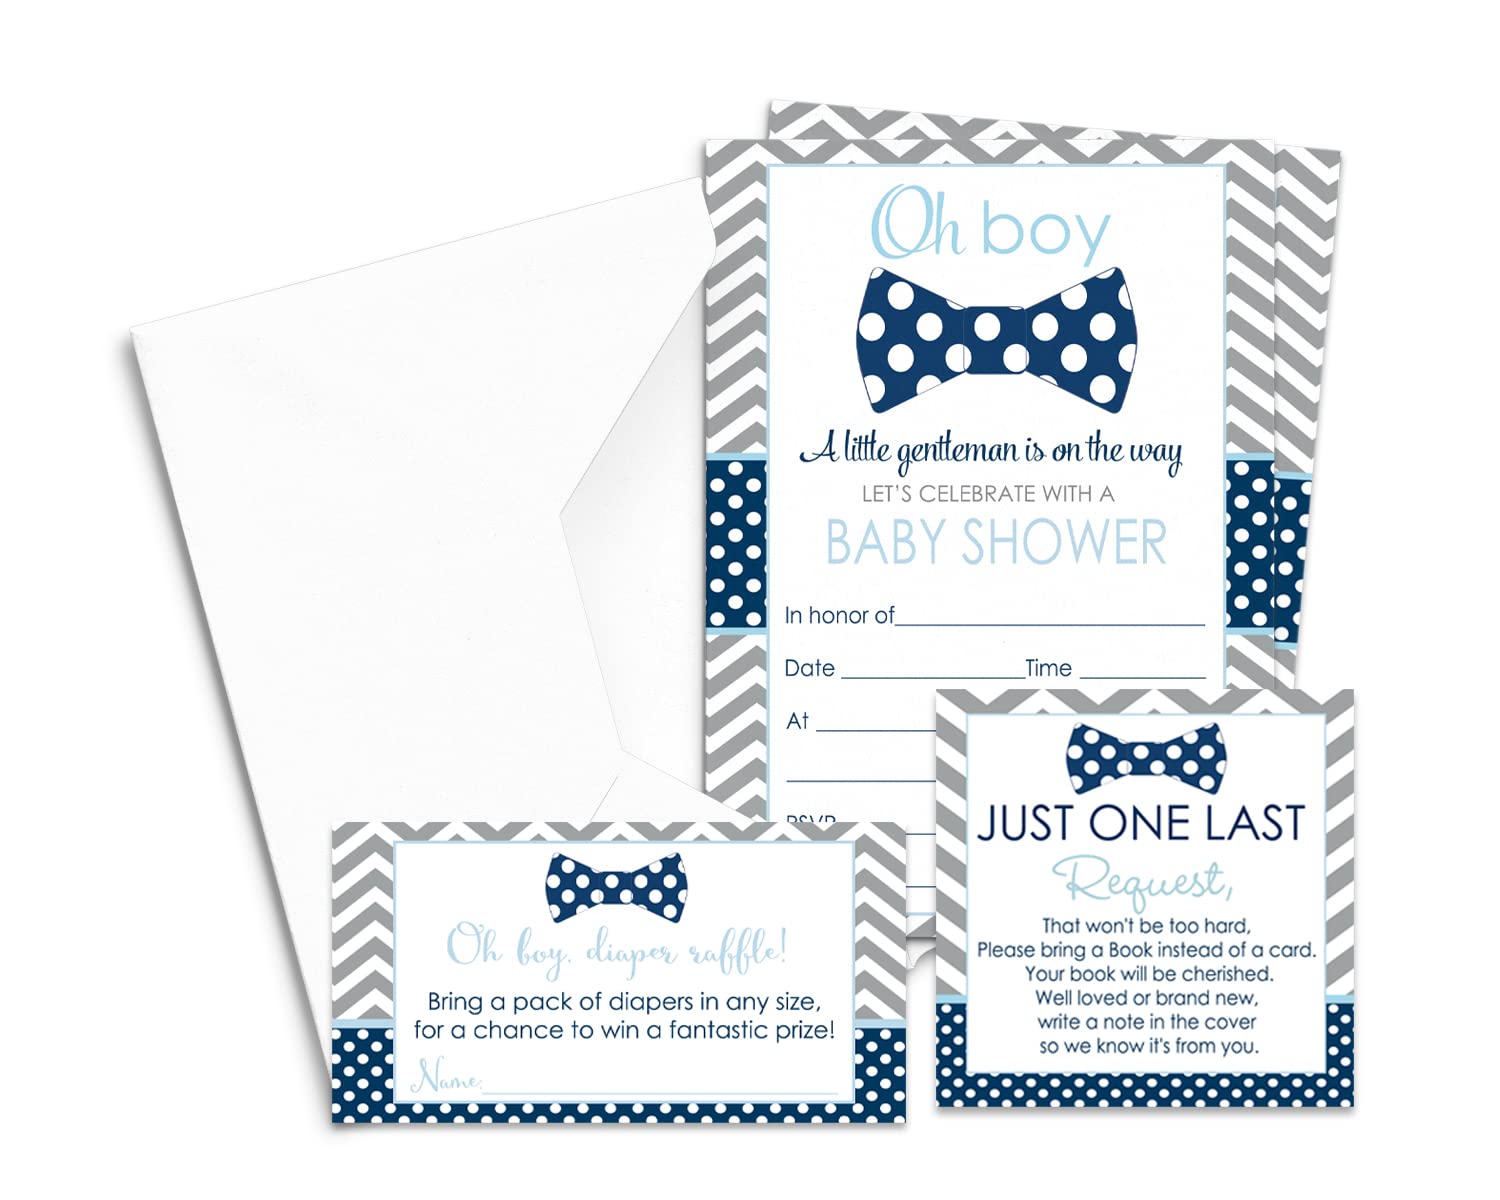 Bow Tie Baby Shower Invitation Bundle (25 Guests) Pack Includes Blank Invites with Envelopes for Boys, Diaper Raffle Insert and Bring a Book Cards Set – Little Man Theme Blue and Grey